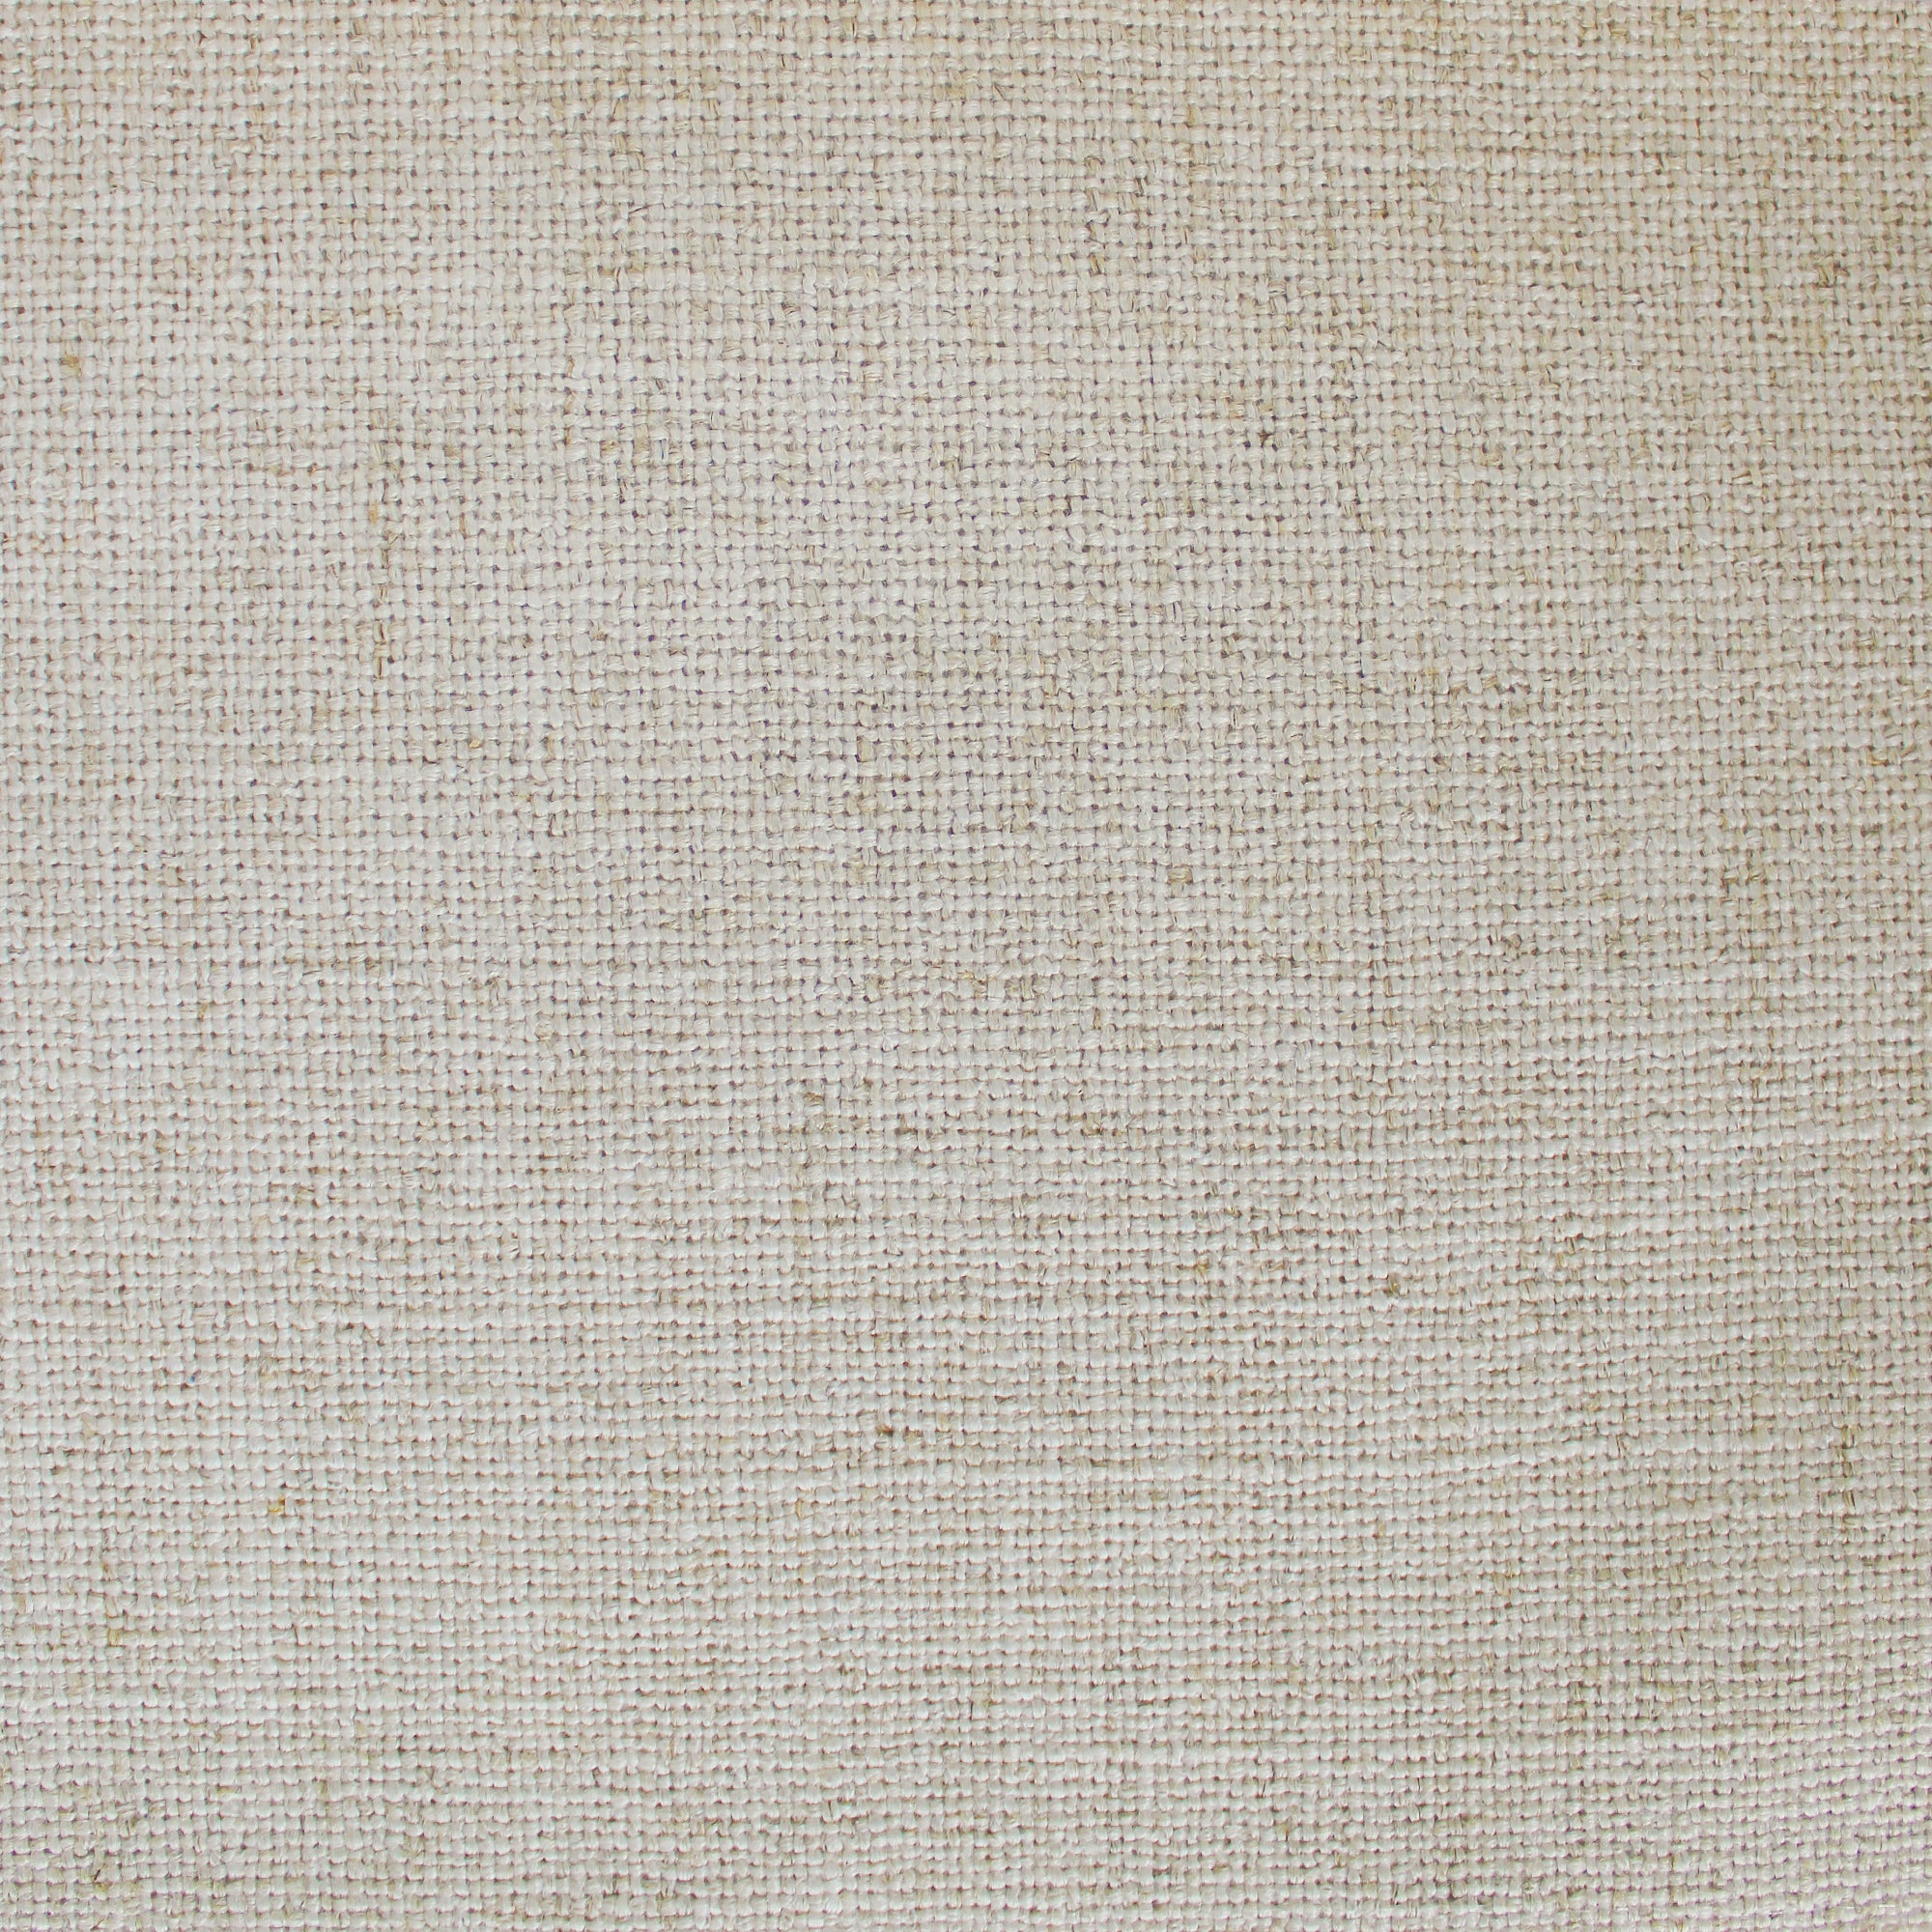 Harland Fabric | Solid Linen Blend